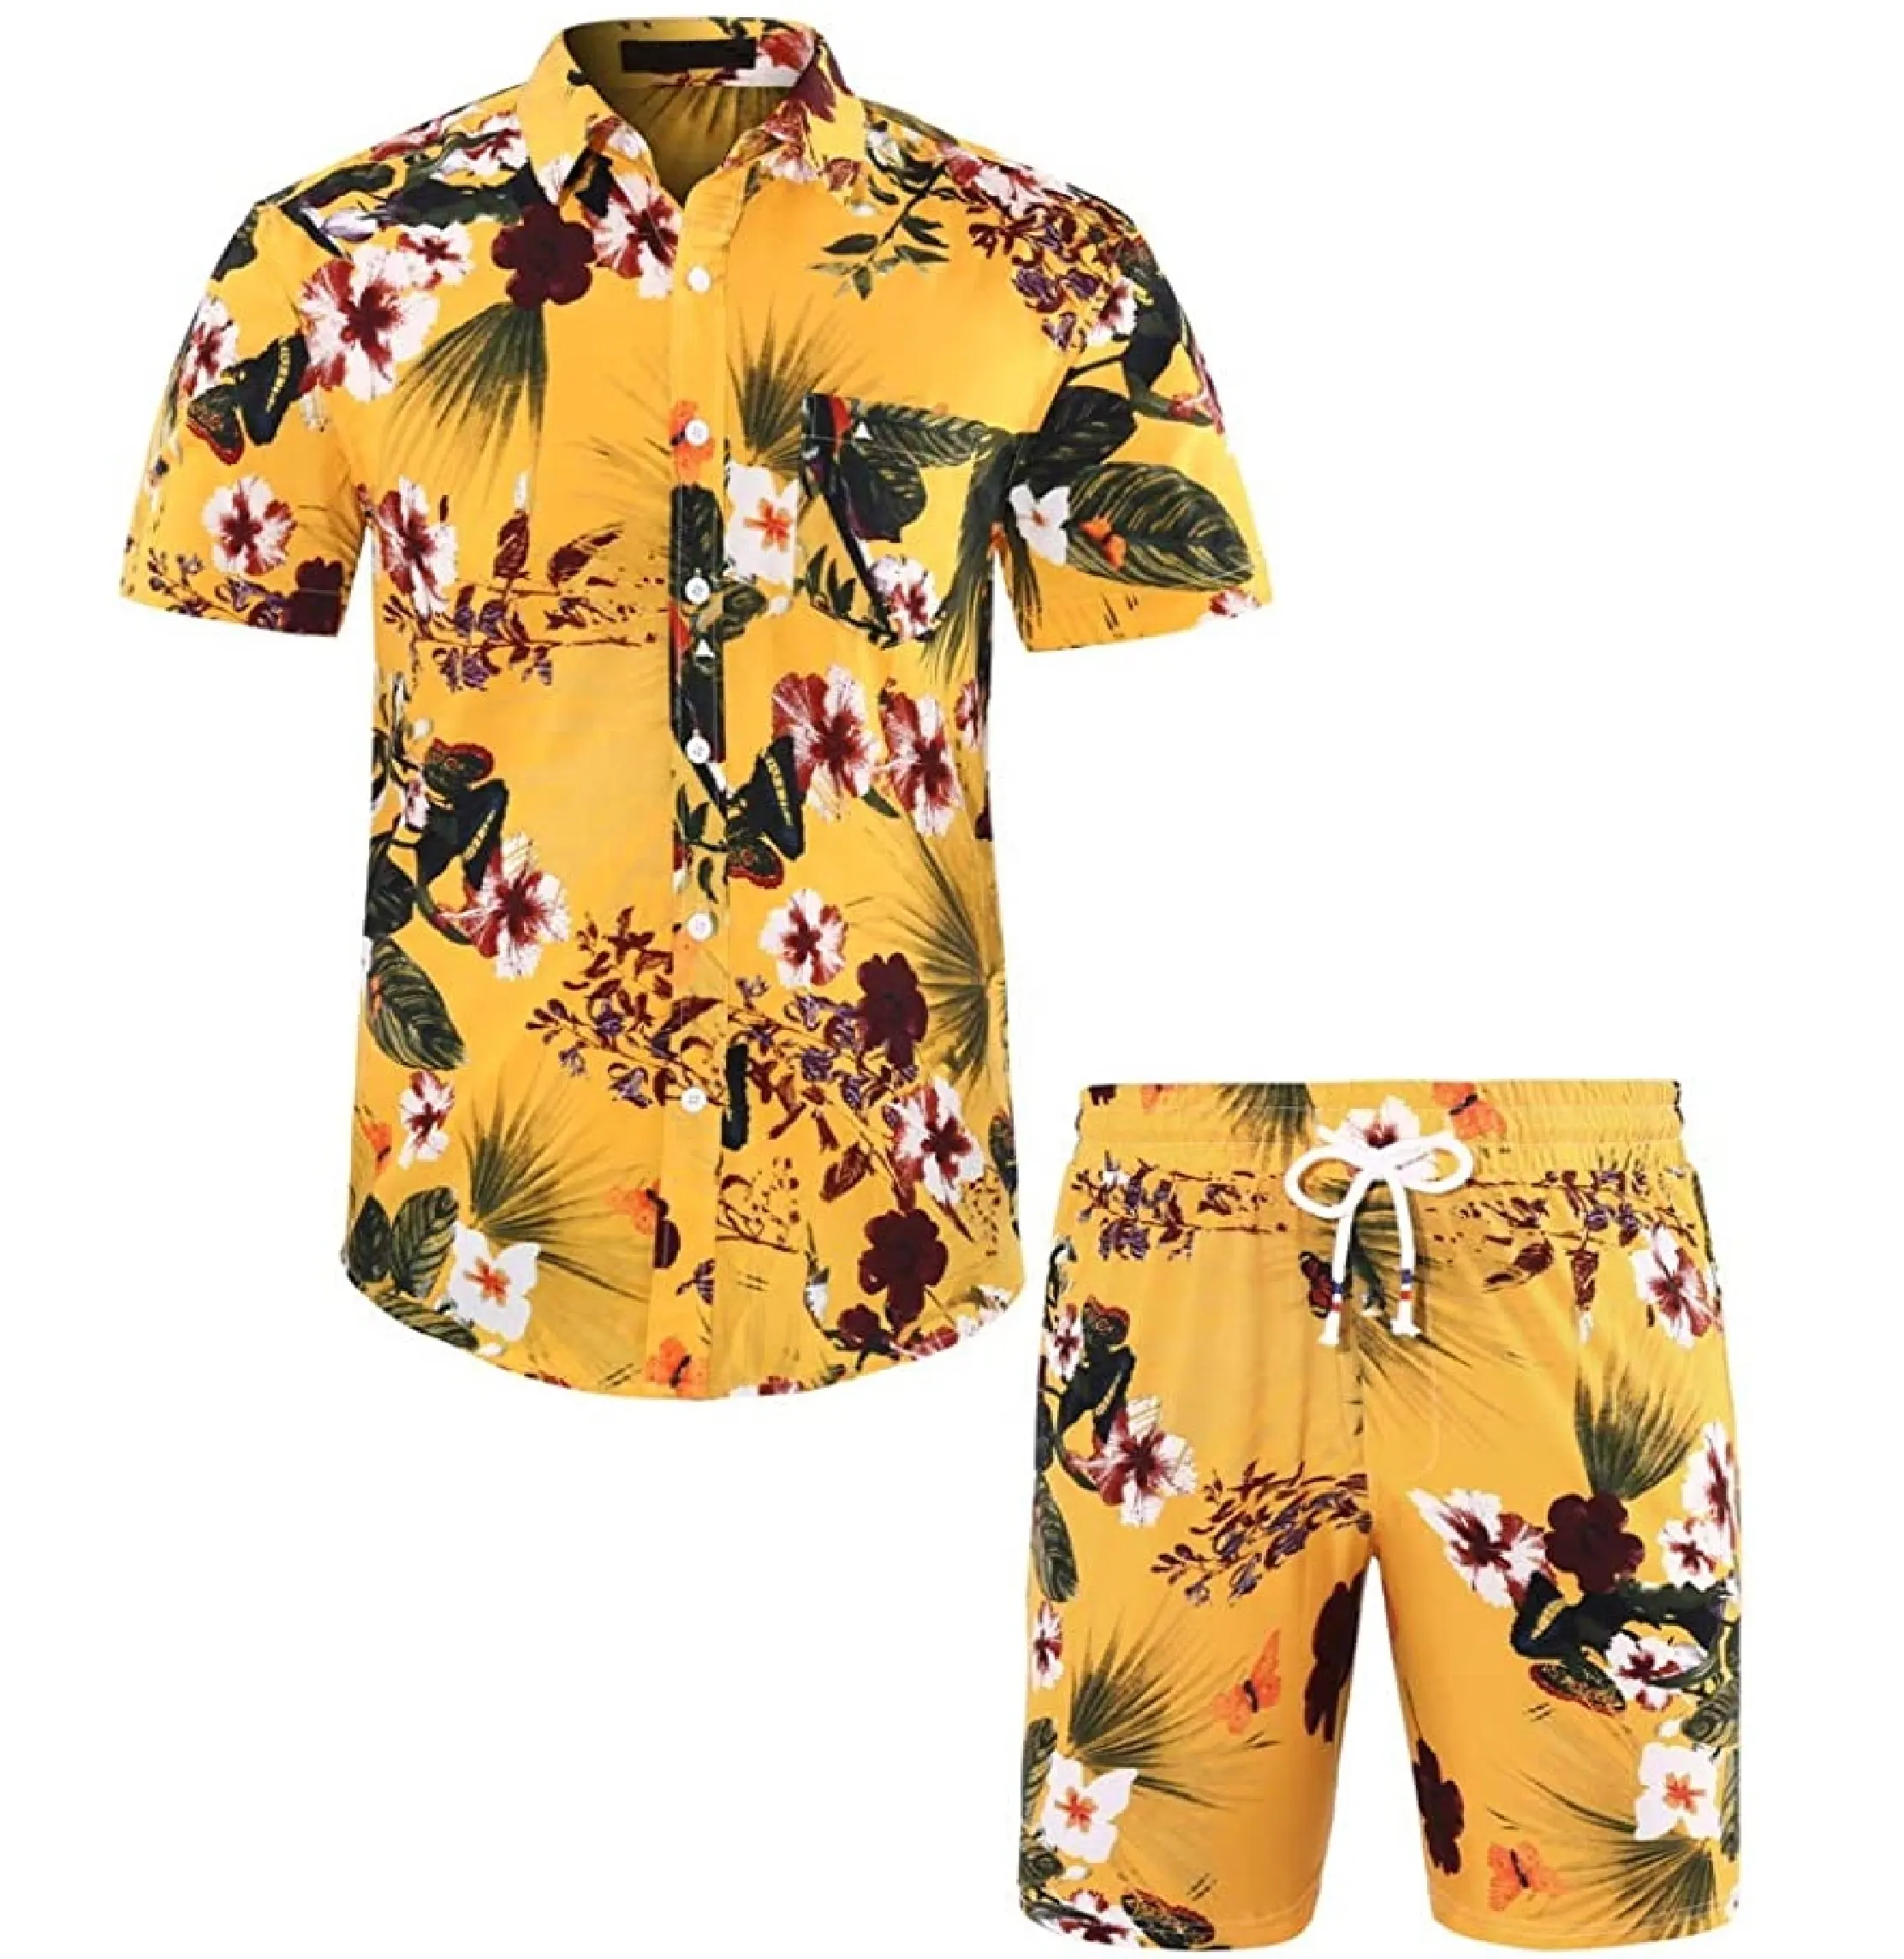 Button Up Casual Floral Print Custom Fabric Wholesale Men's Breathable Summer Sets Short Half Sleeve Shirt Shorts For Mens